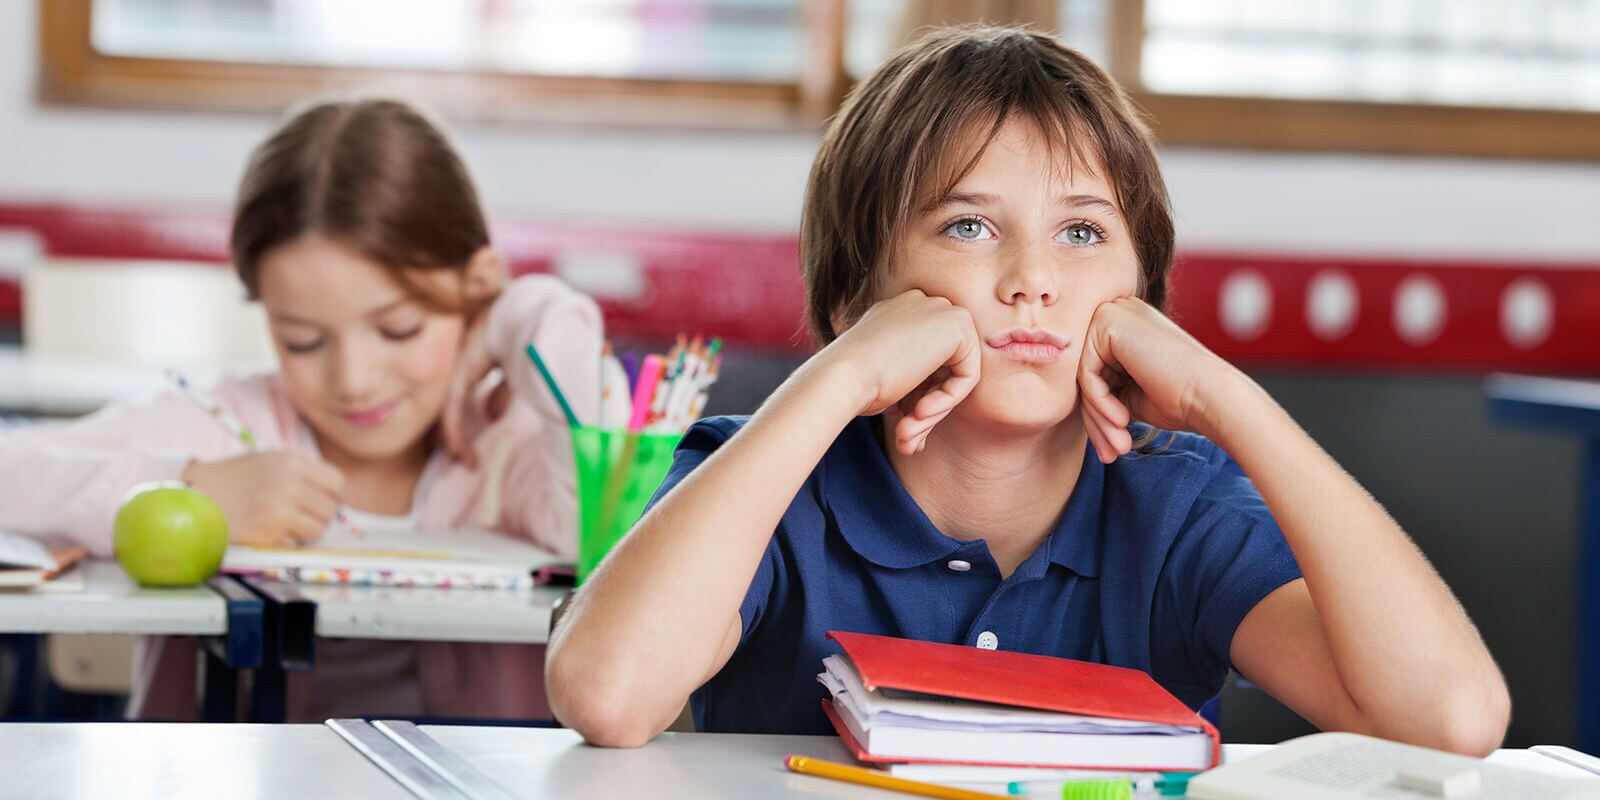 Stock image: Bored schoolboy looking away while sitting at desk with girl in background at classroom | By: Tyler Olson